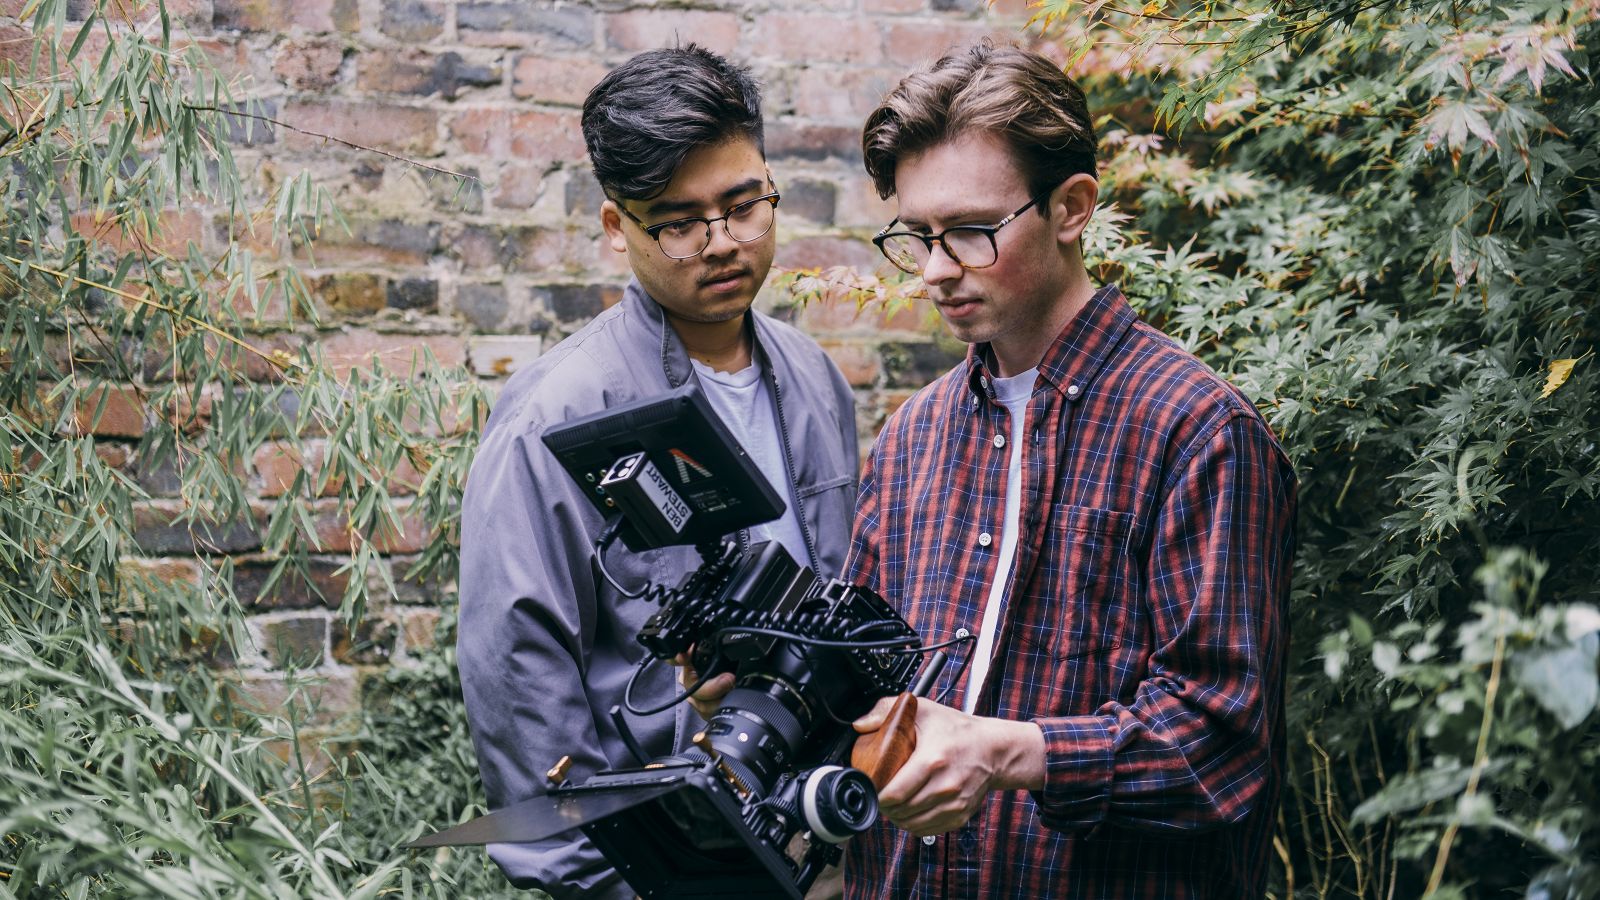 William Cho and Ben Stewart looking at a video camera.